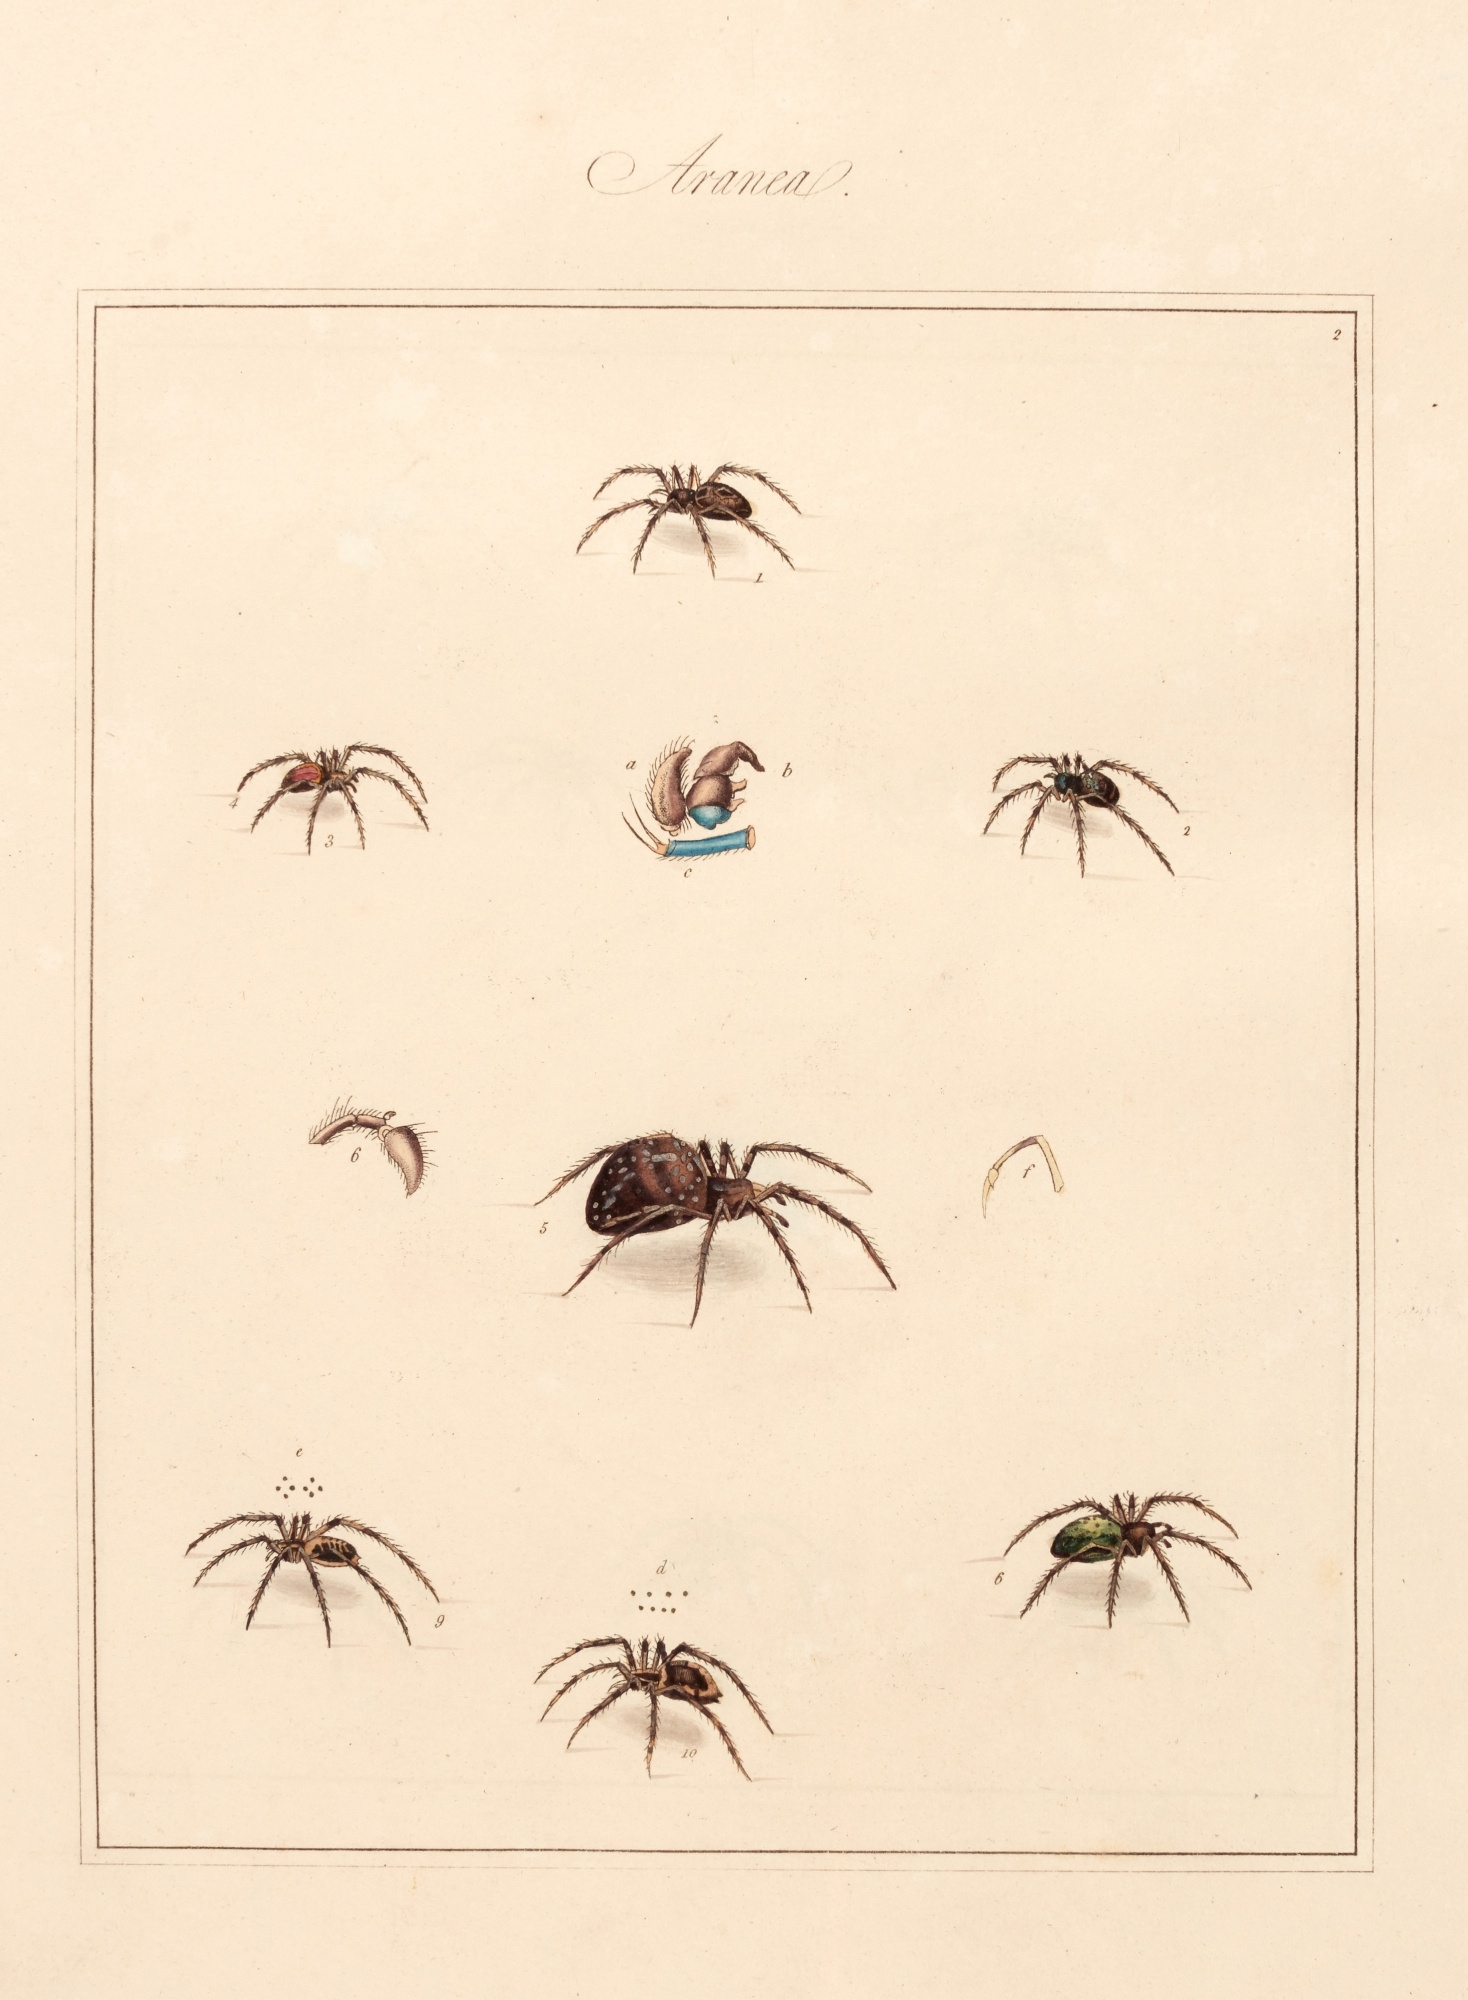 Artwork by Thomas Martyn, Aranei, or a natural history of spiders, Made of Hand colored stipple engraved panels (28)